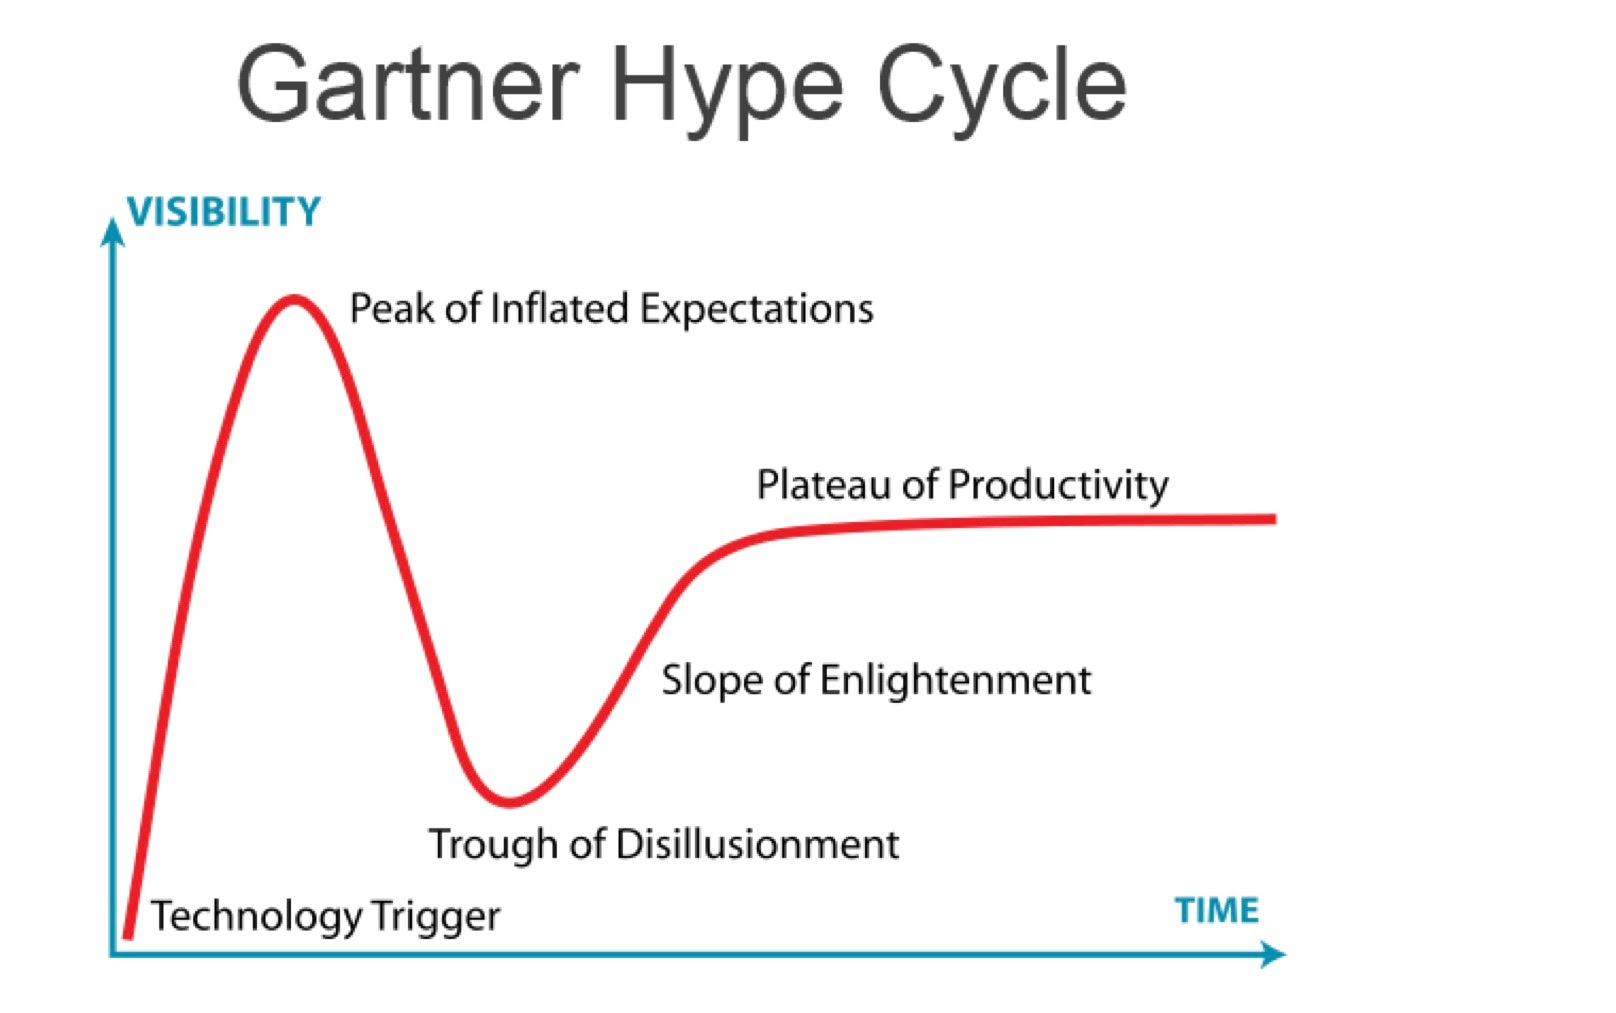 The Hyper Cycle